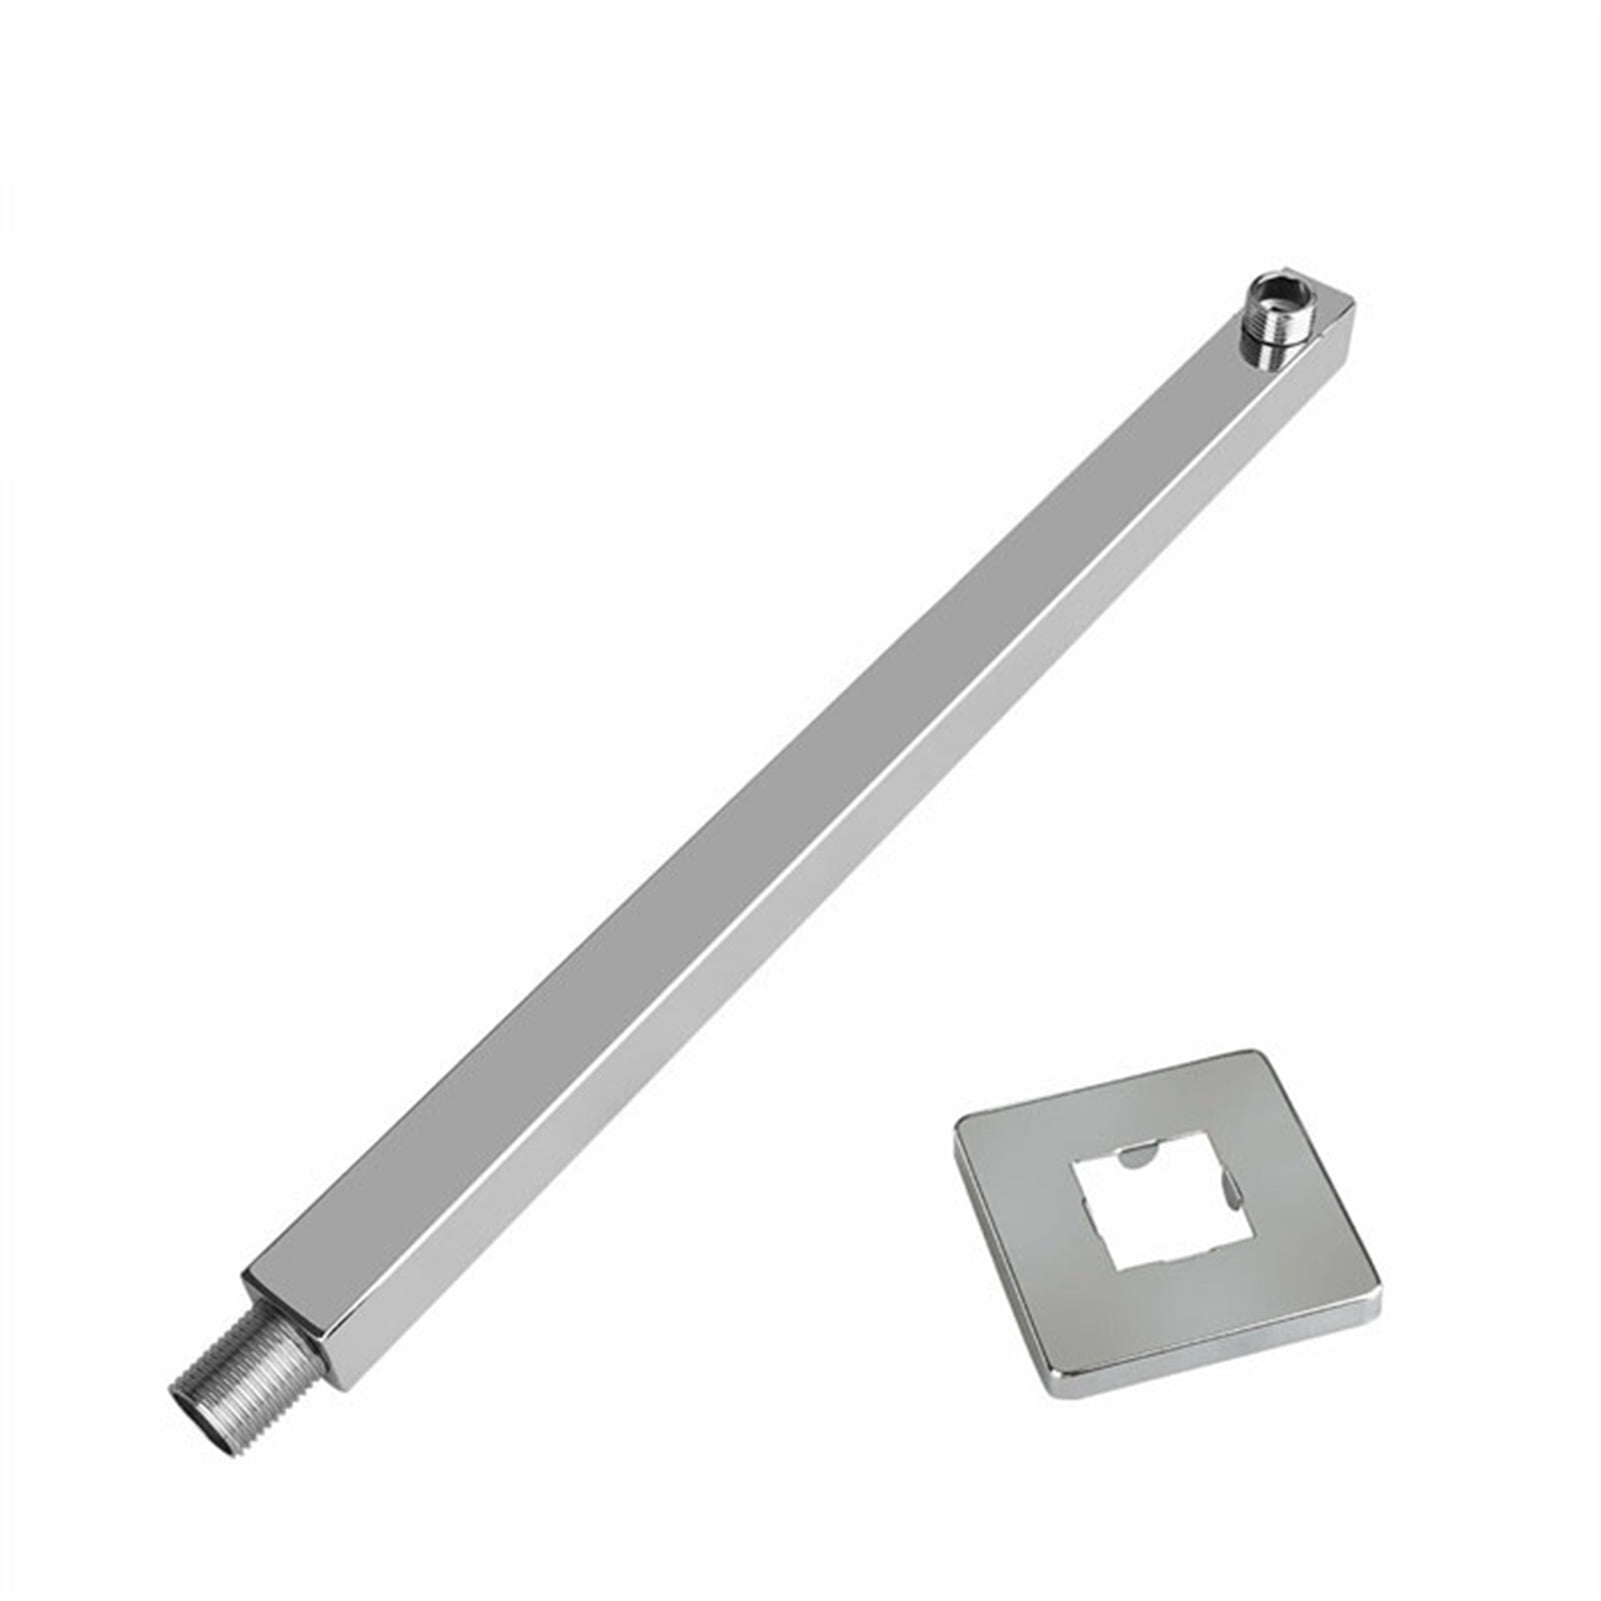 24-inch Stainless Steel Square Rainfall Shower Head Extension Arm Wall Mounted 